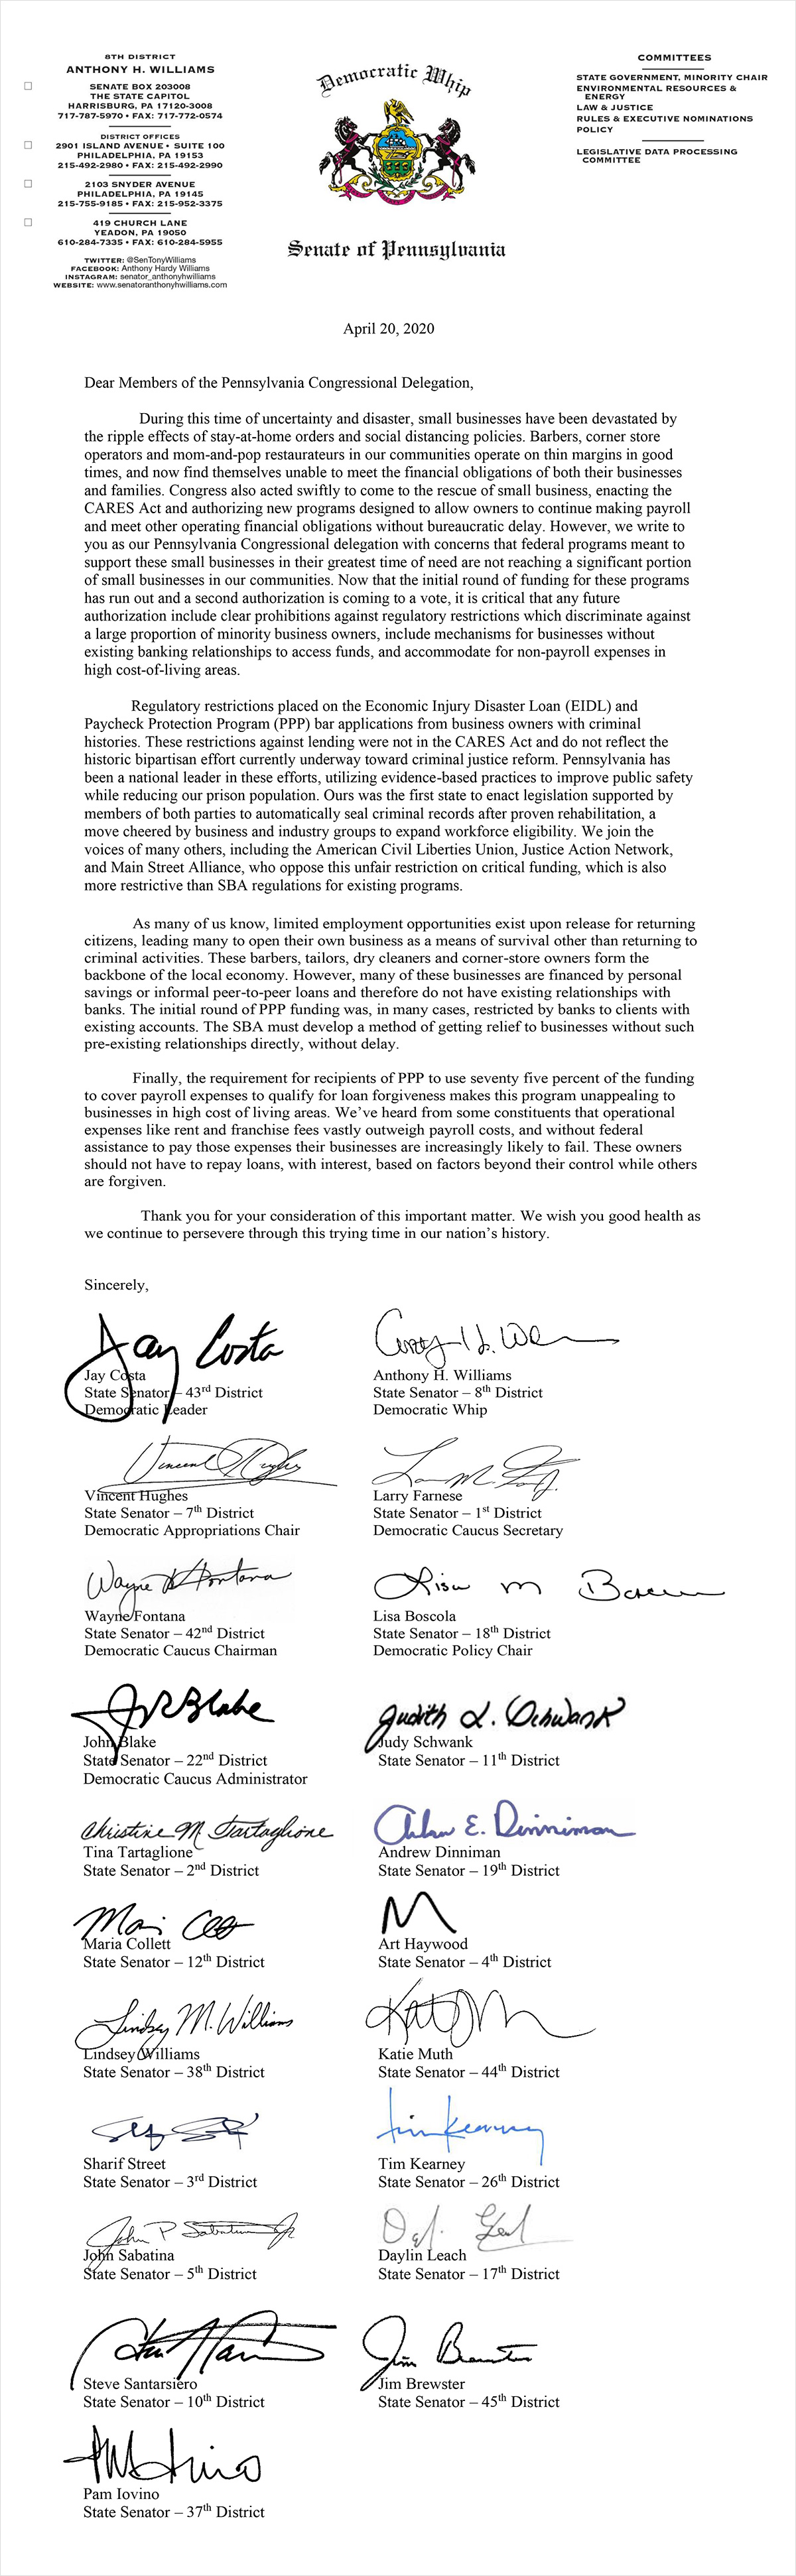 SBA Funds Letter to Congressional Delegation 